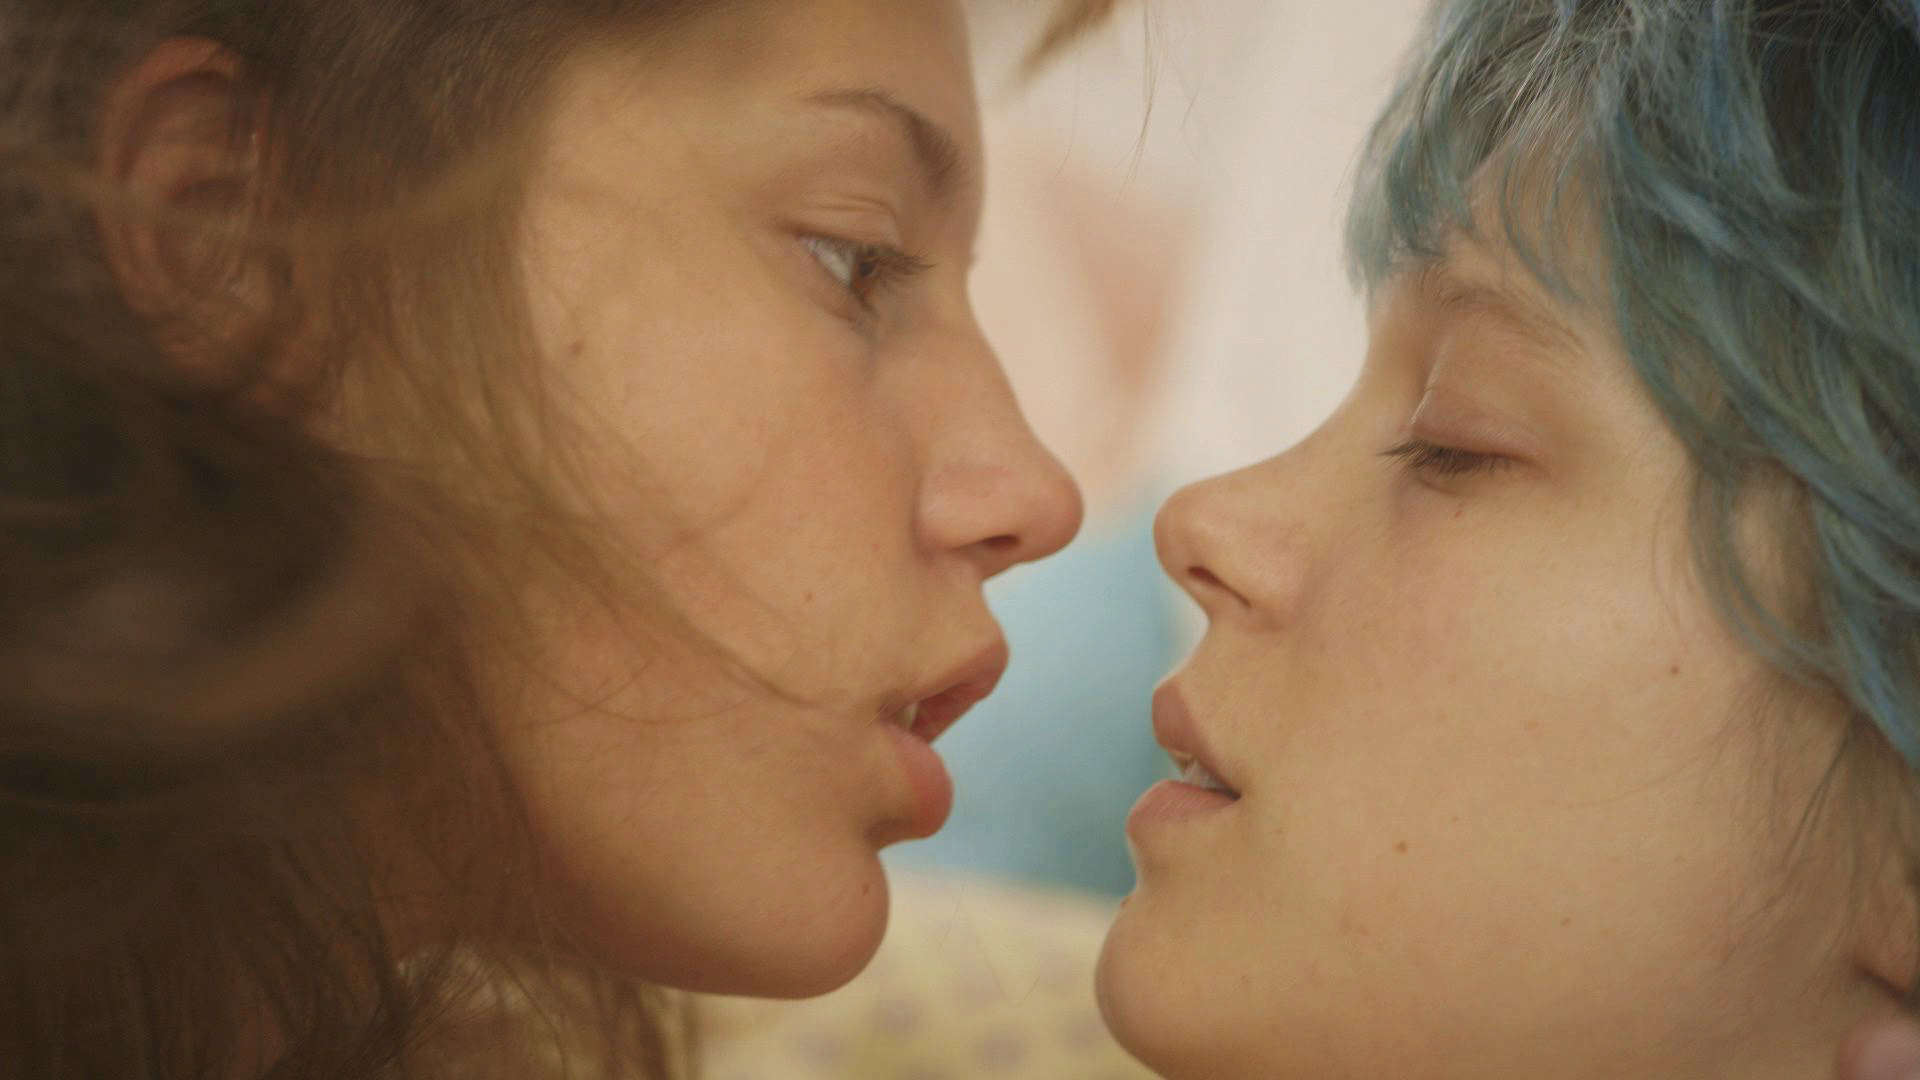 The two actresses in blue is the warmest color about to kiss